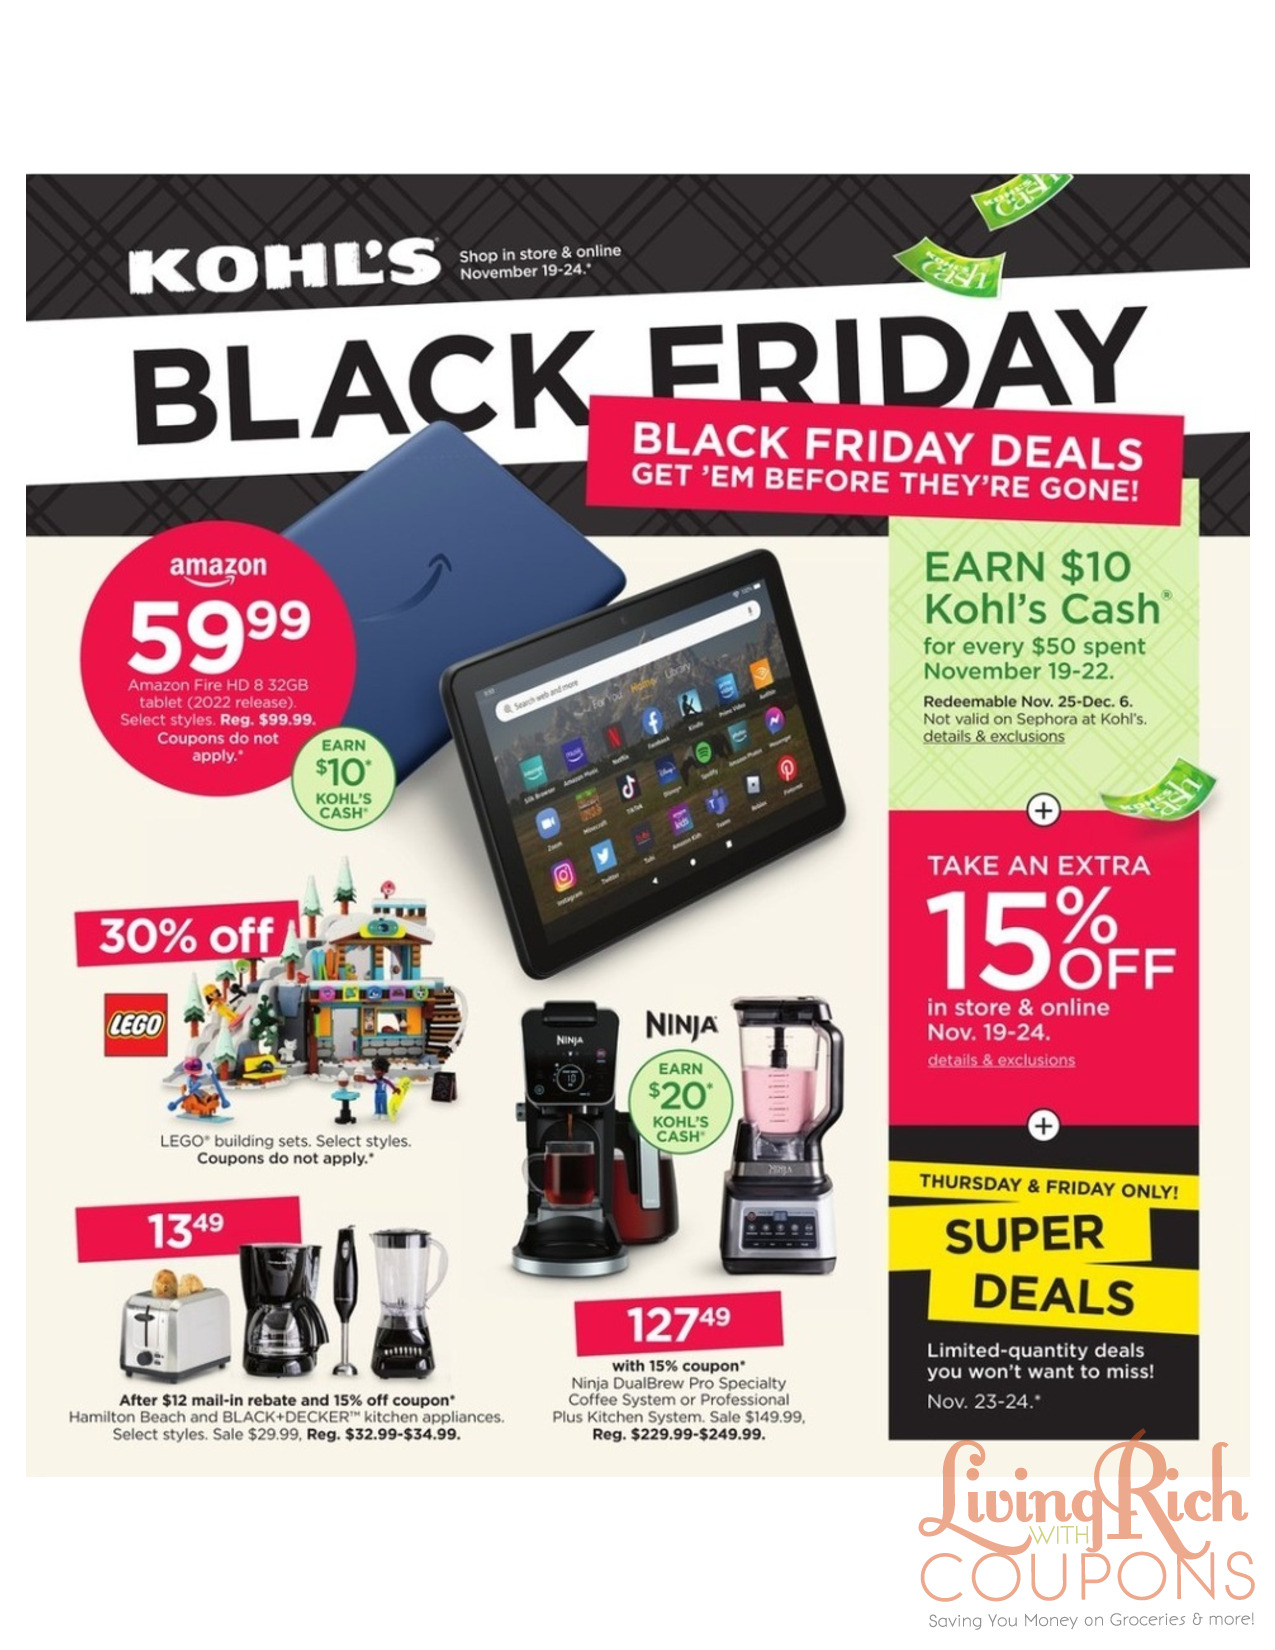 KOHL'S BLACK FRIDAY AD 2021  Super-Deals on clothing, kitchen, electronics  & more! 